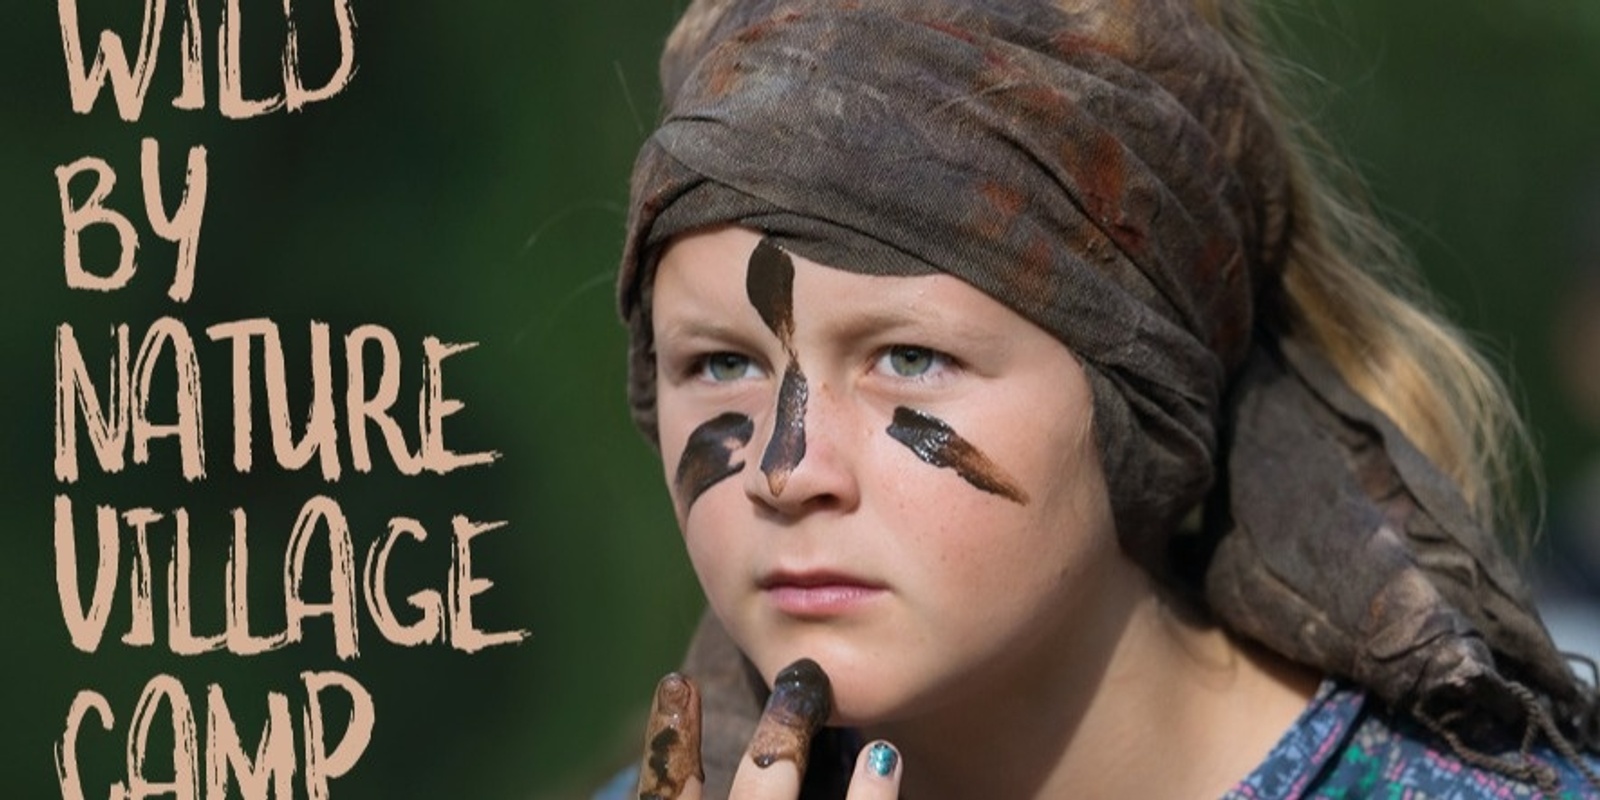 Banner image for Summer Wild by Nature Village Camp 2020